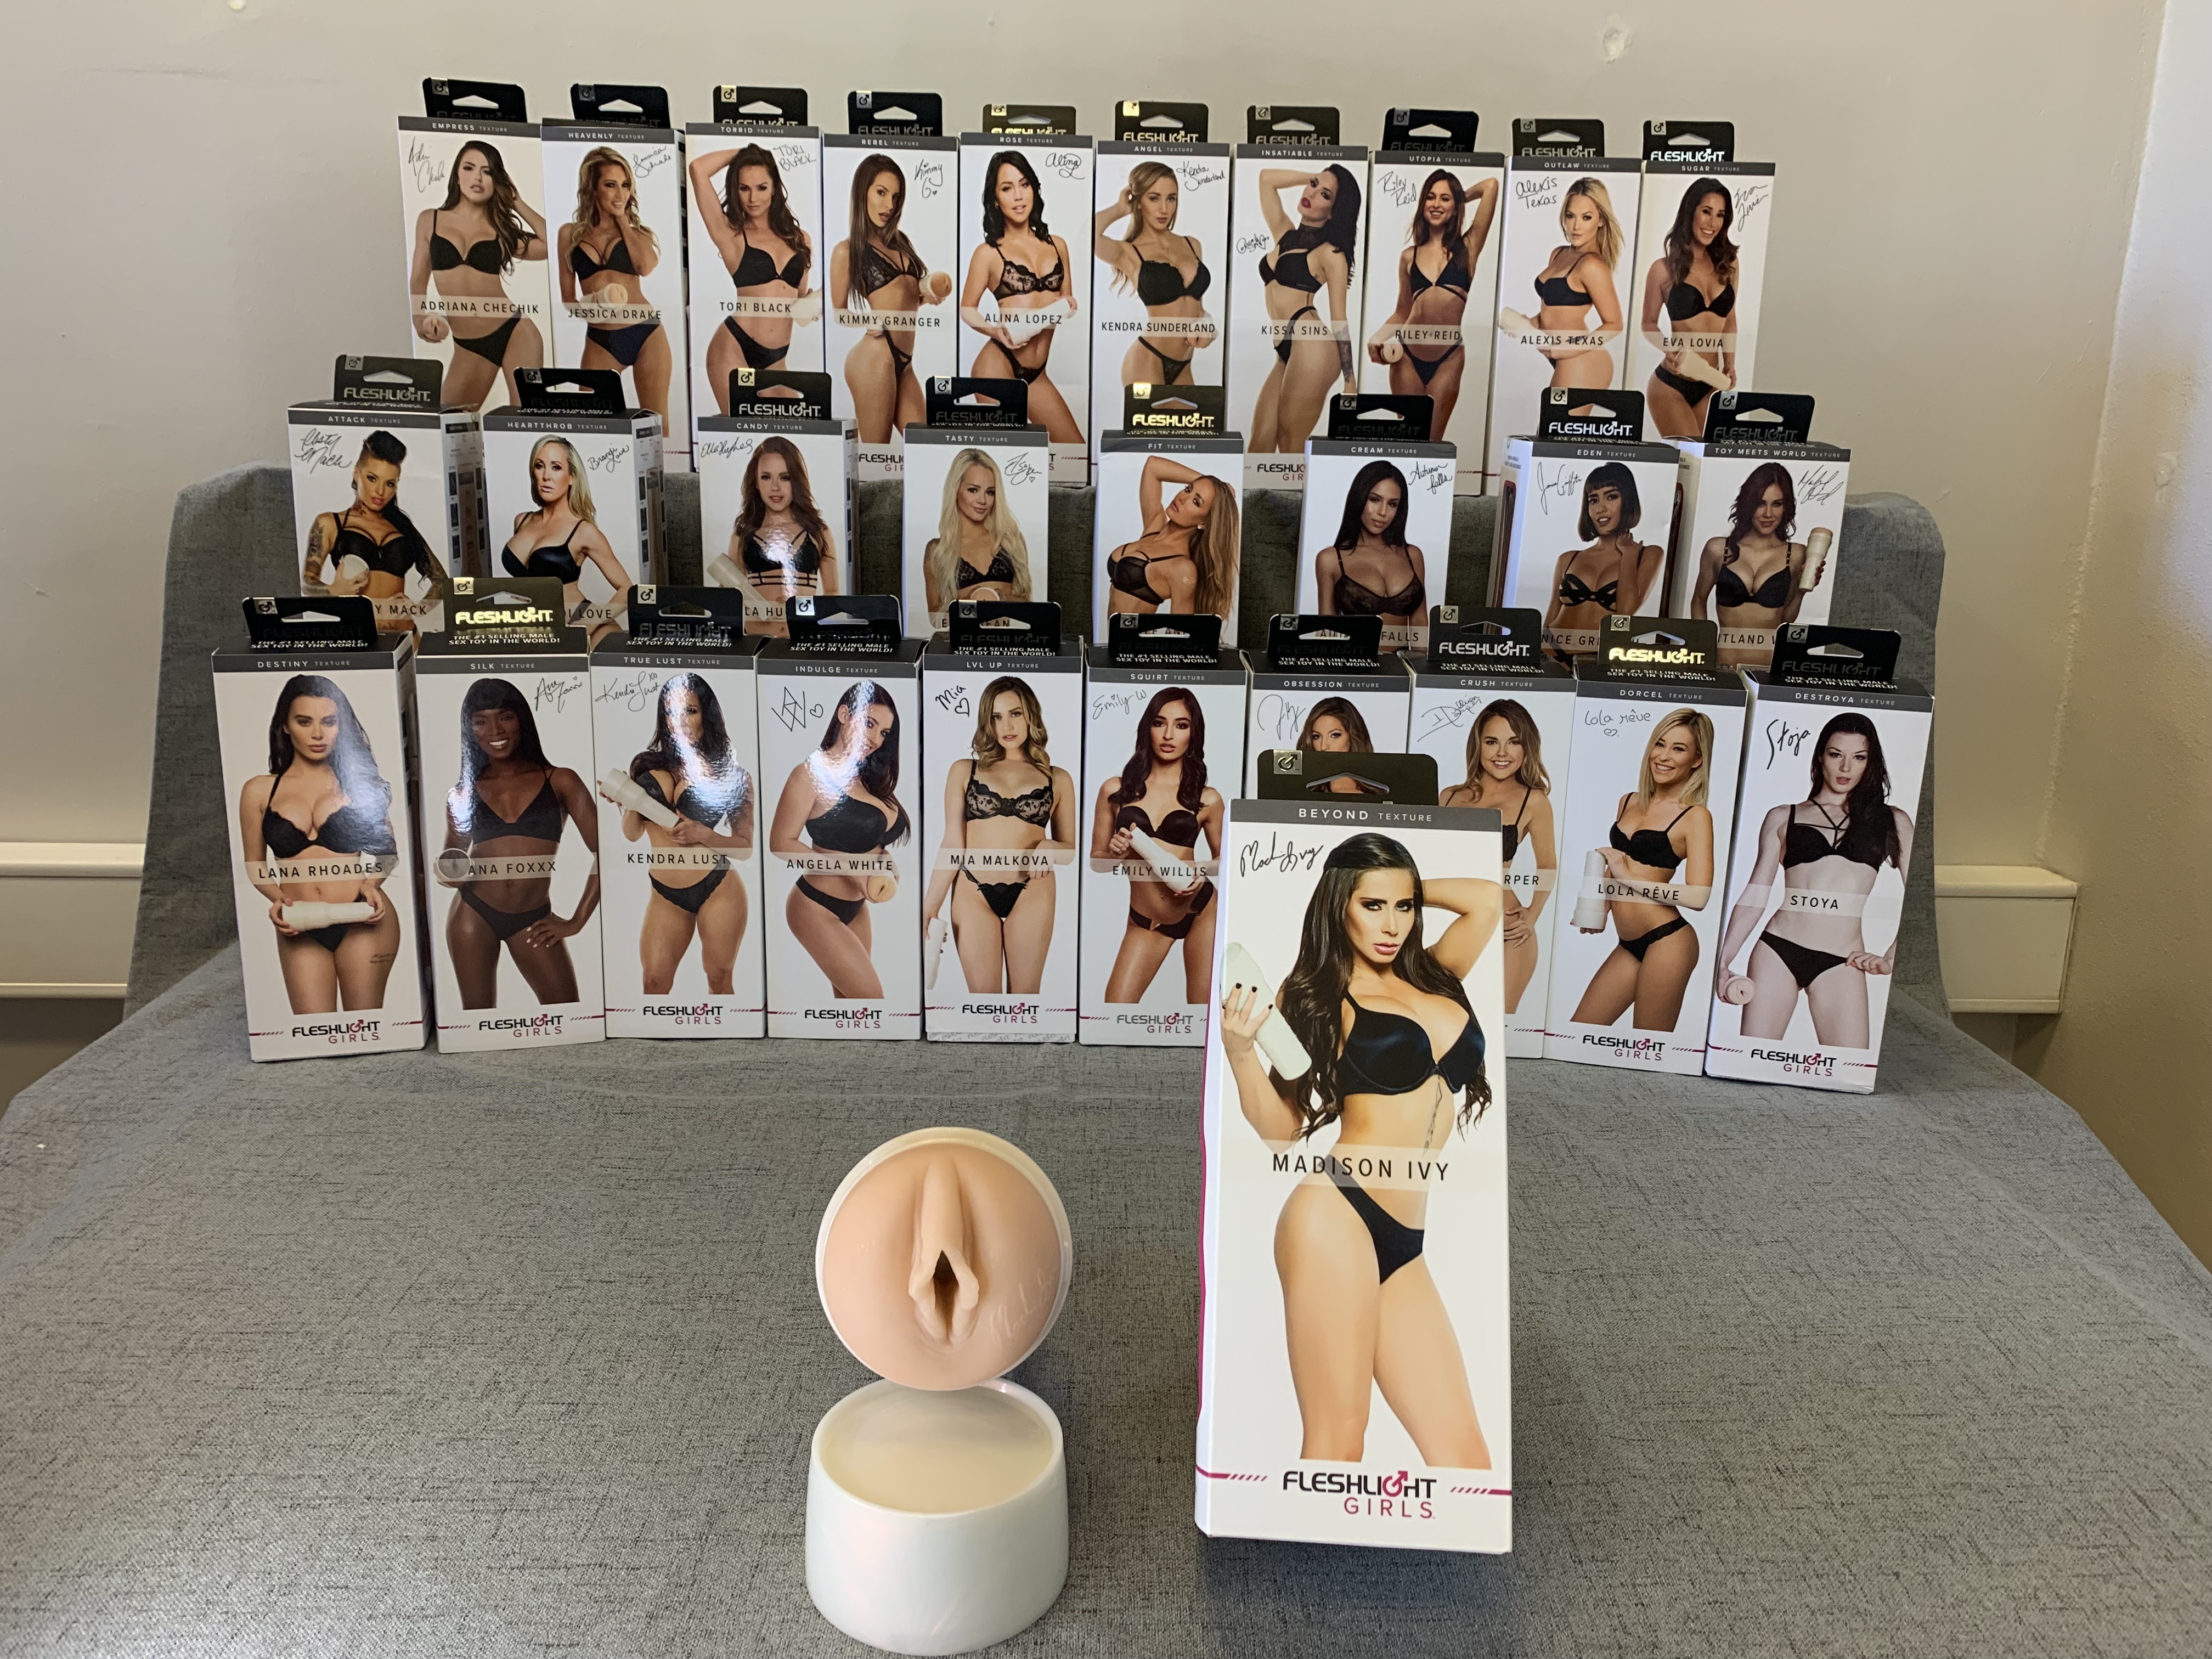 My Personal Experiences with Madison Ivy Fleshlight Beyond 